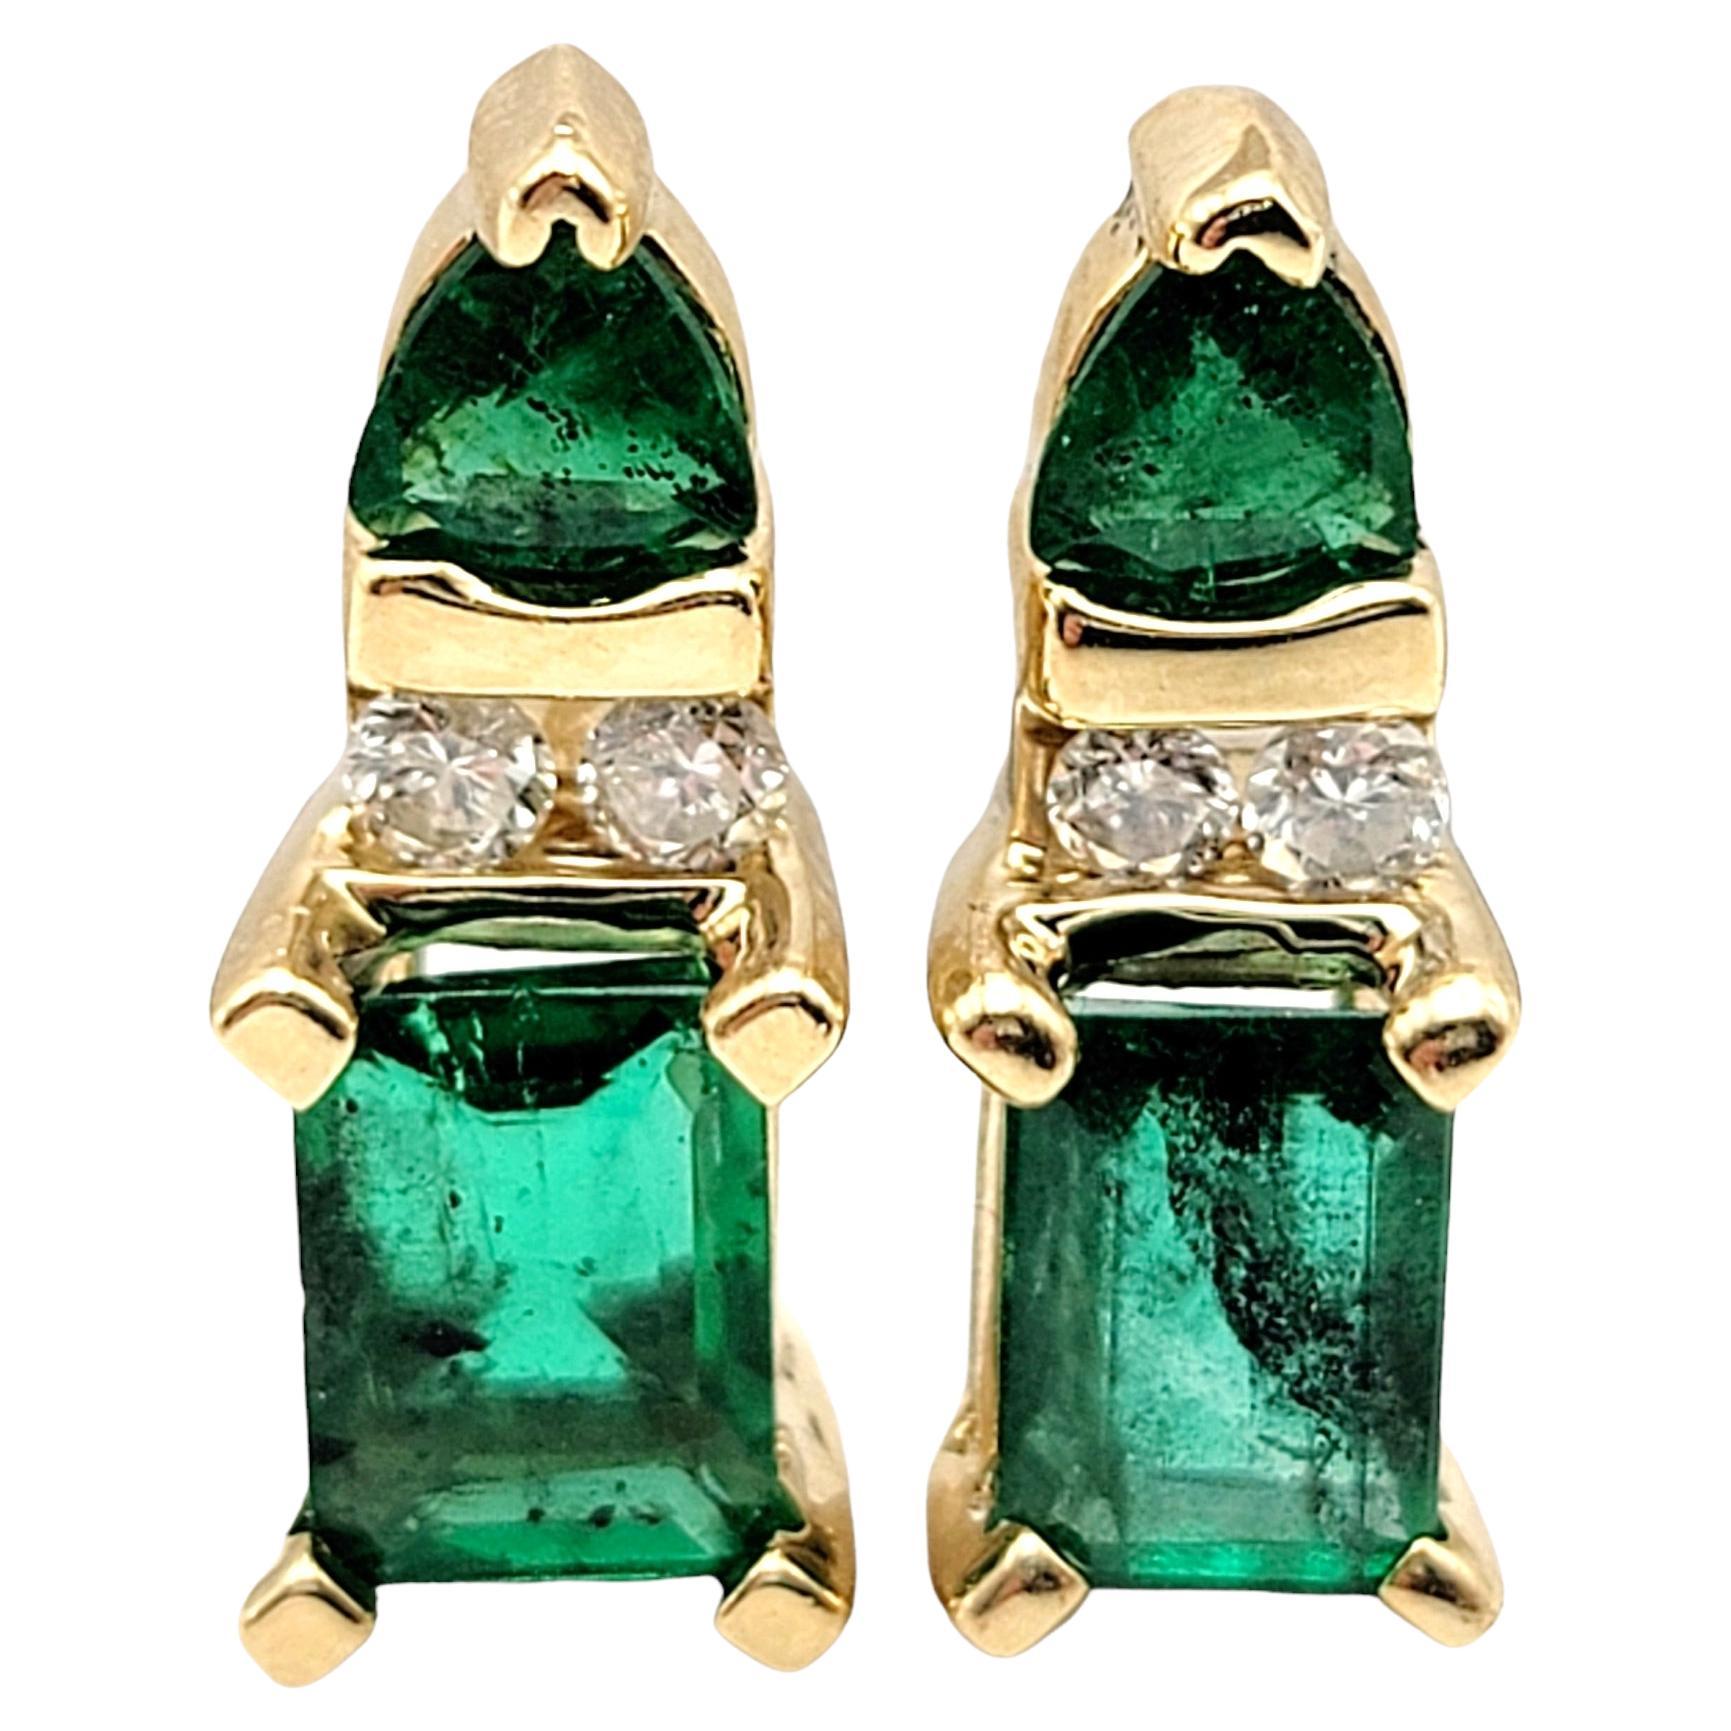 1.85 Carats Total Emerald Cut Emerald and Diamond Stud Earrings in Yellow Gold